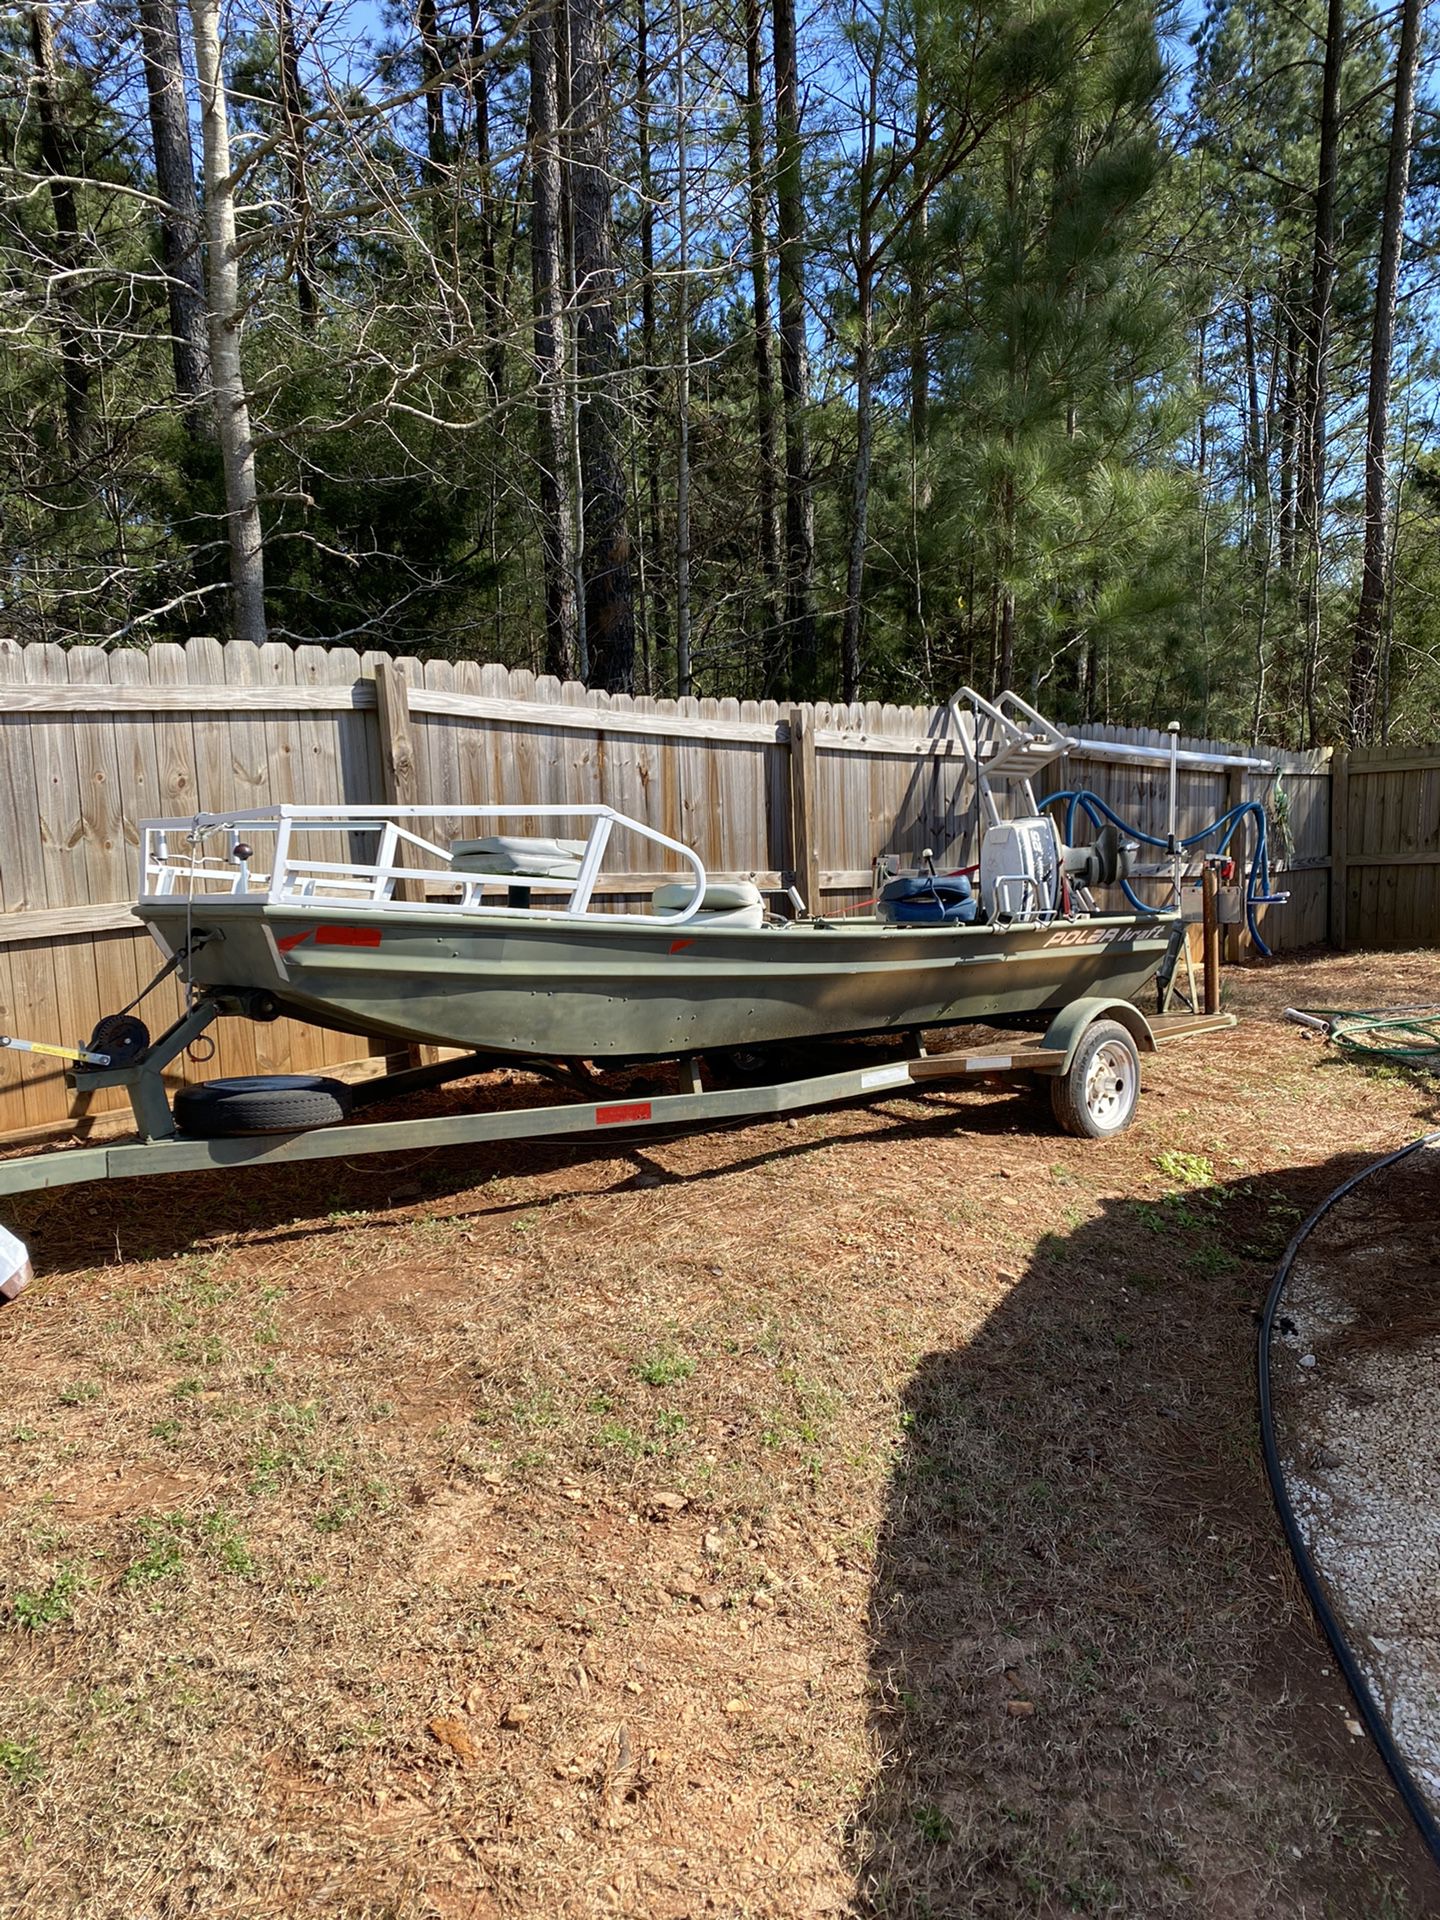 16 ft John boat with trailer